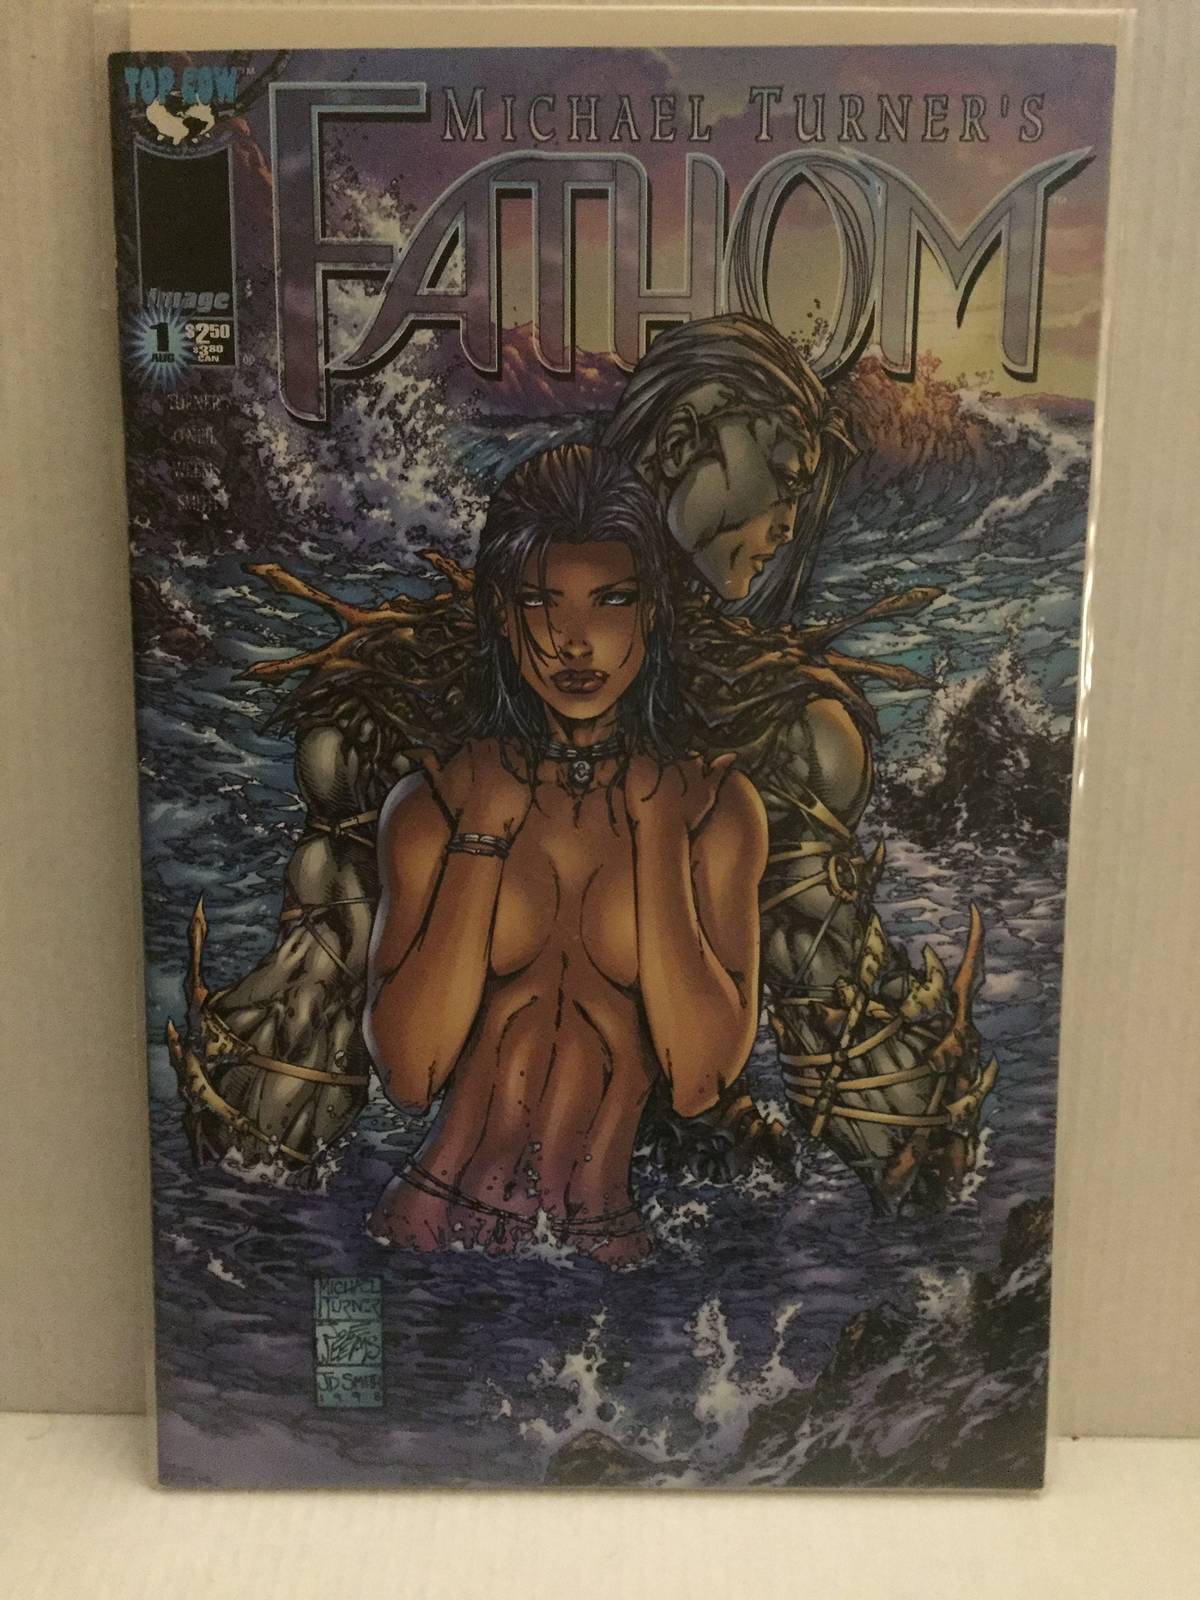 Primary image for 1998 Top Cow Image Comics Michael Turner's Fathom #1 Variant Cover C